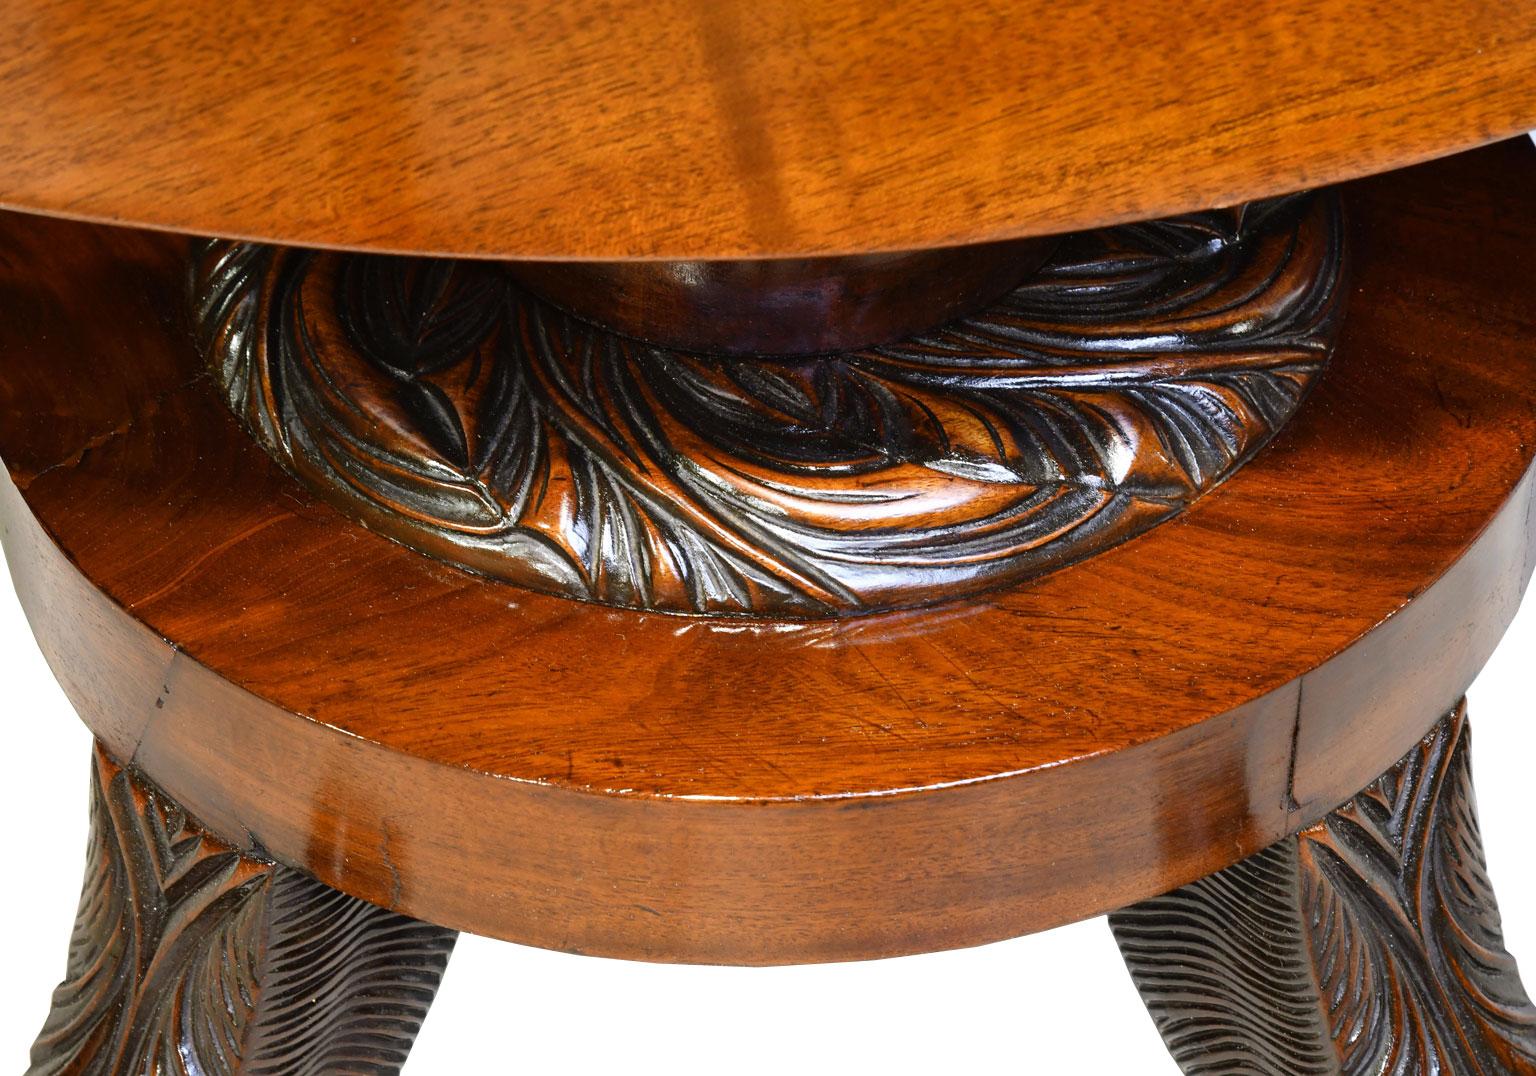 19th Century Federal Round Pedestal Table in West Indies Mahogany, New York, circa 1820